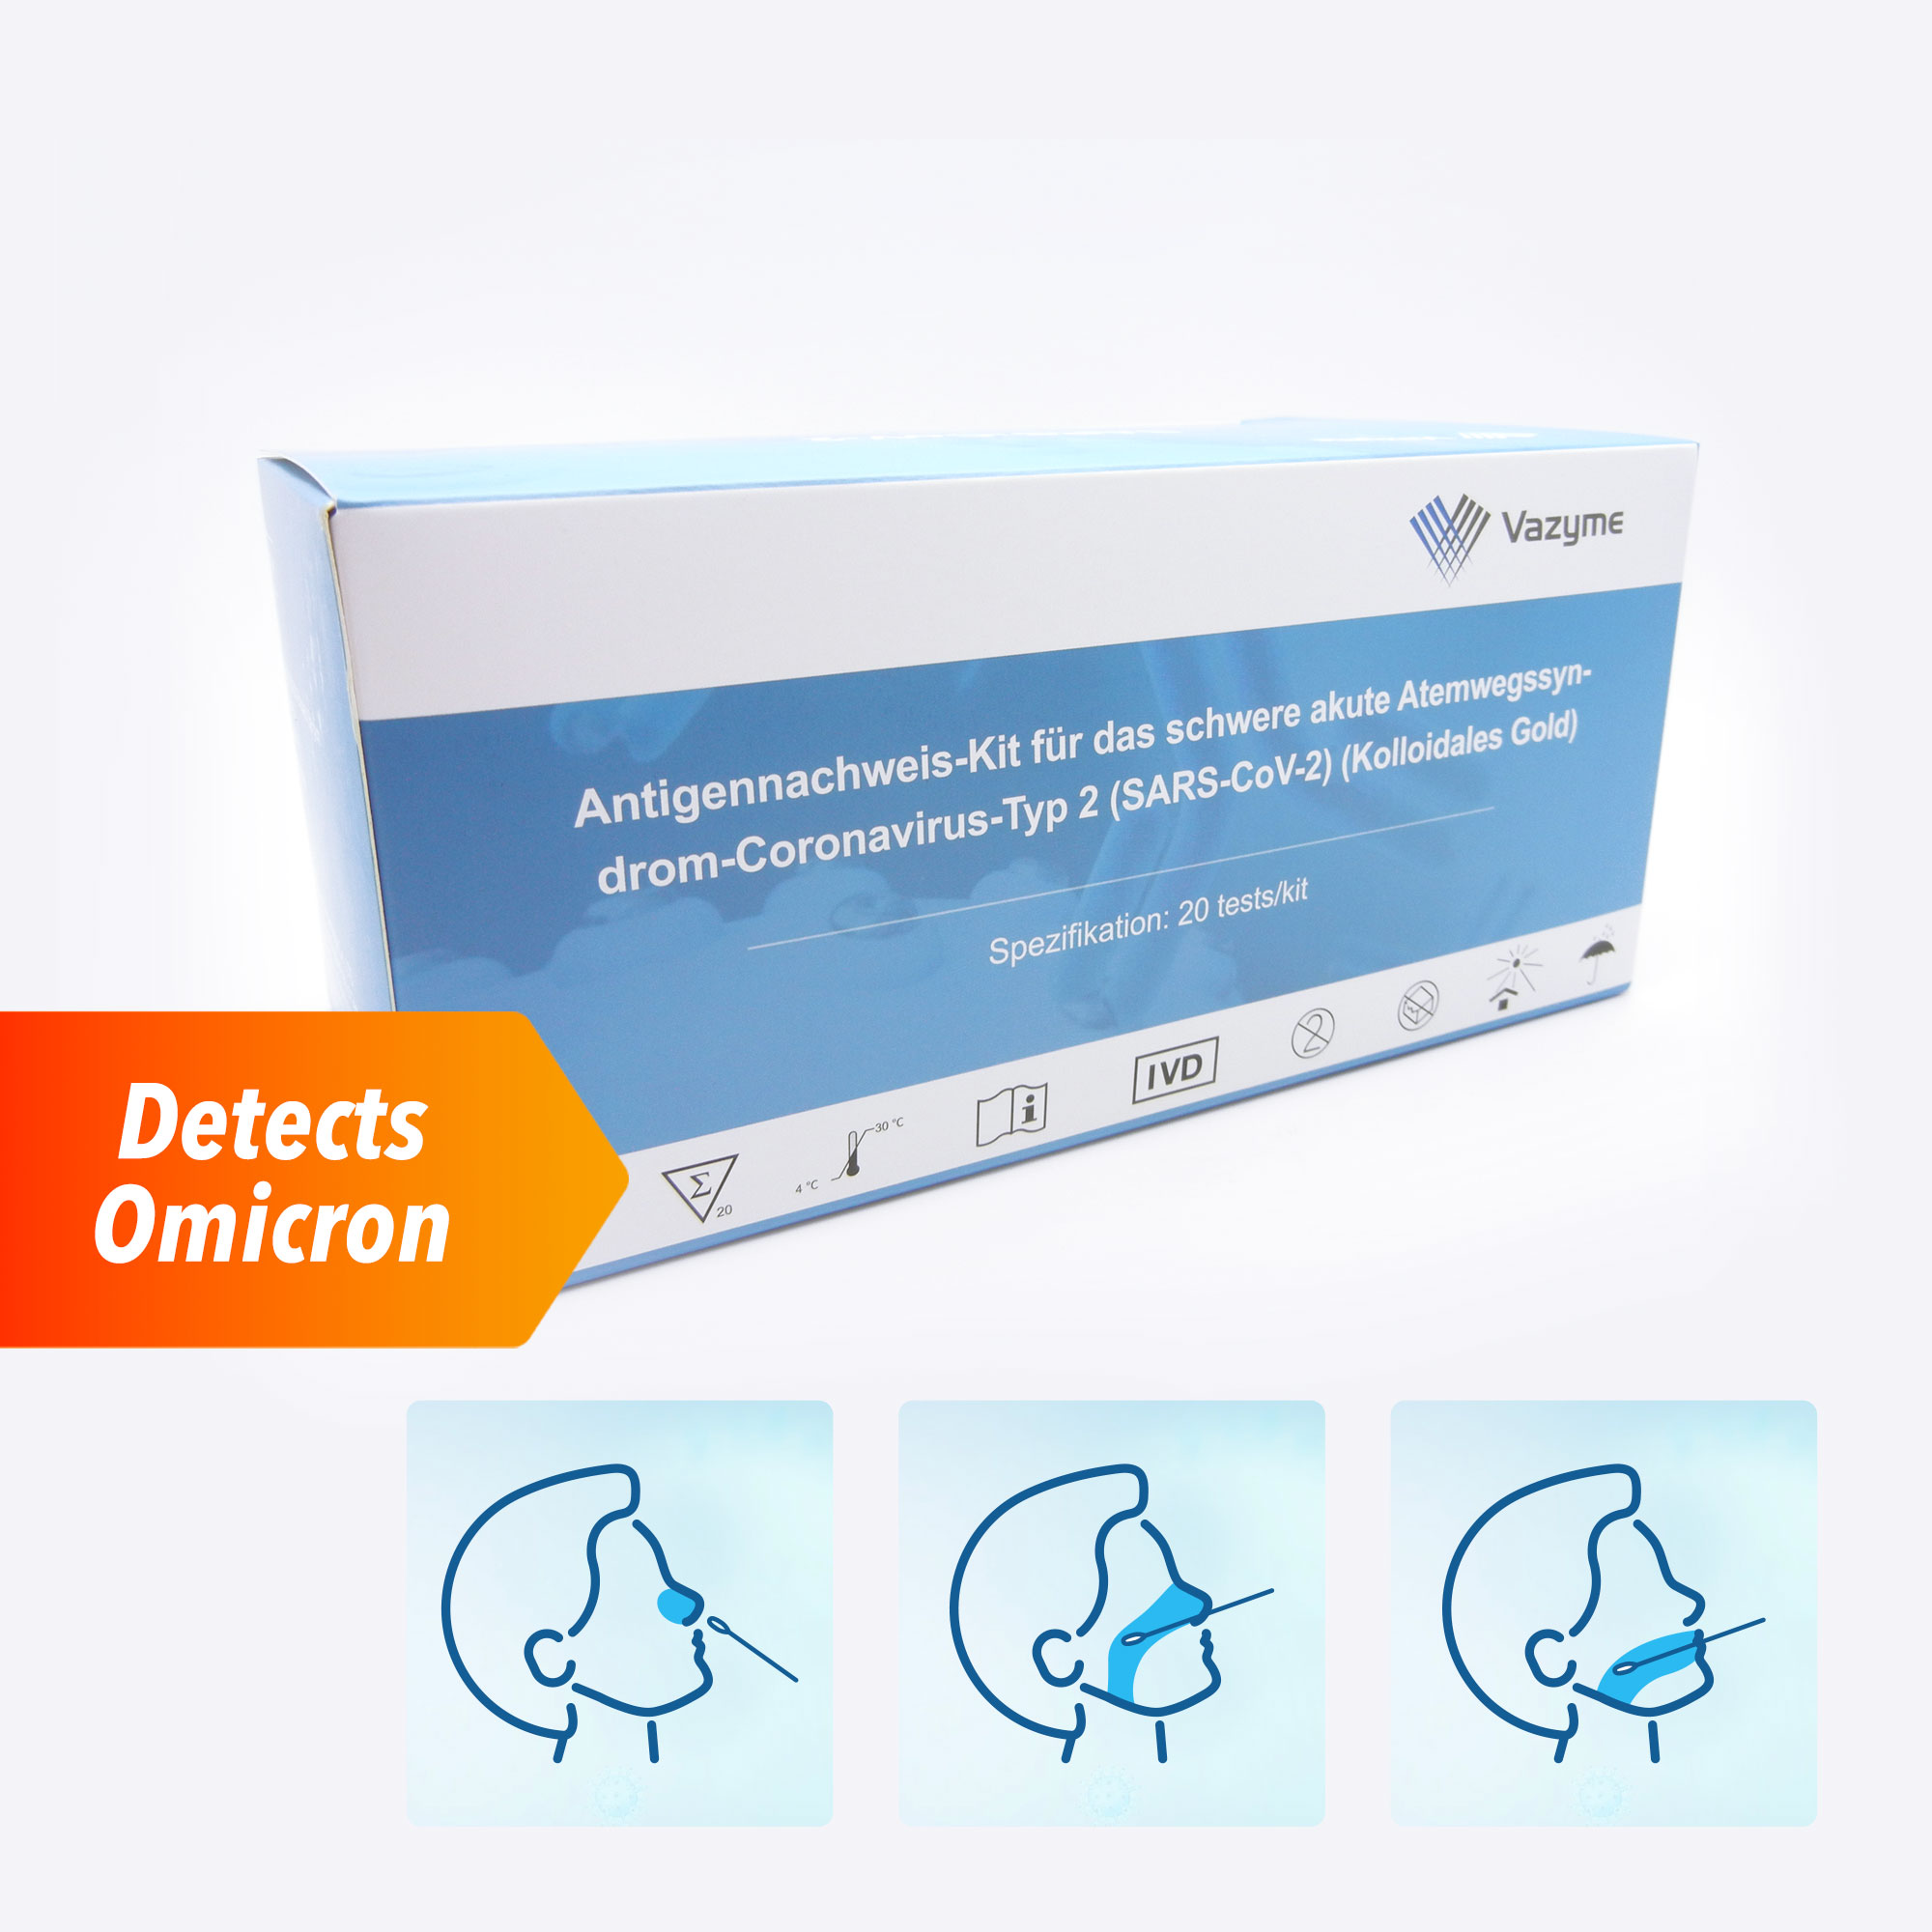 Vazyme Rapid Test detects Omicron